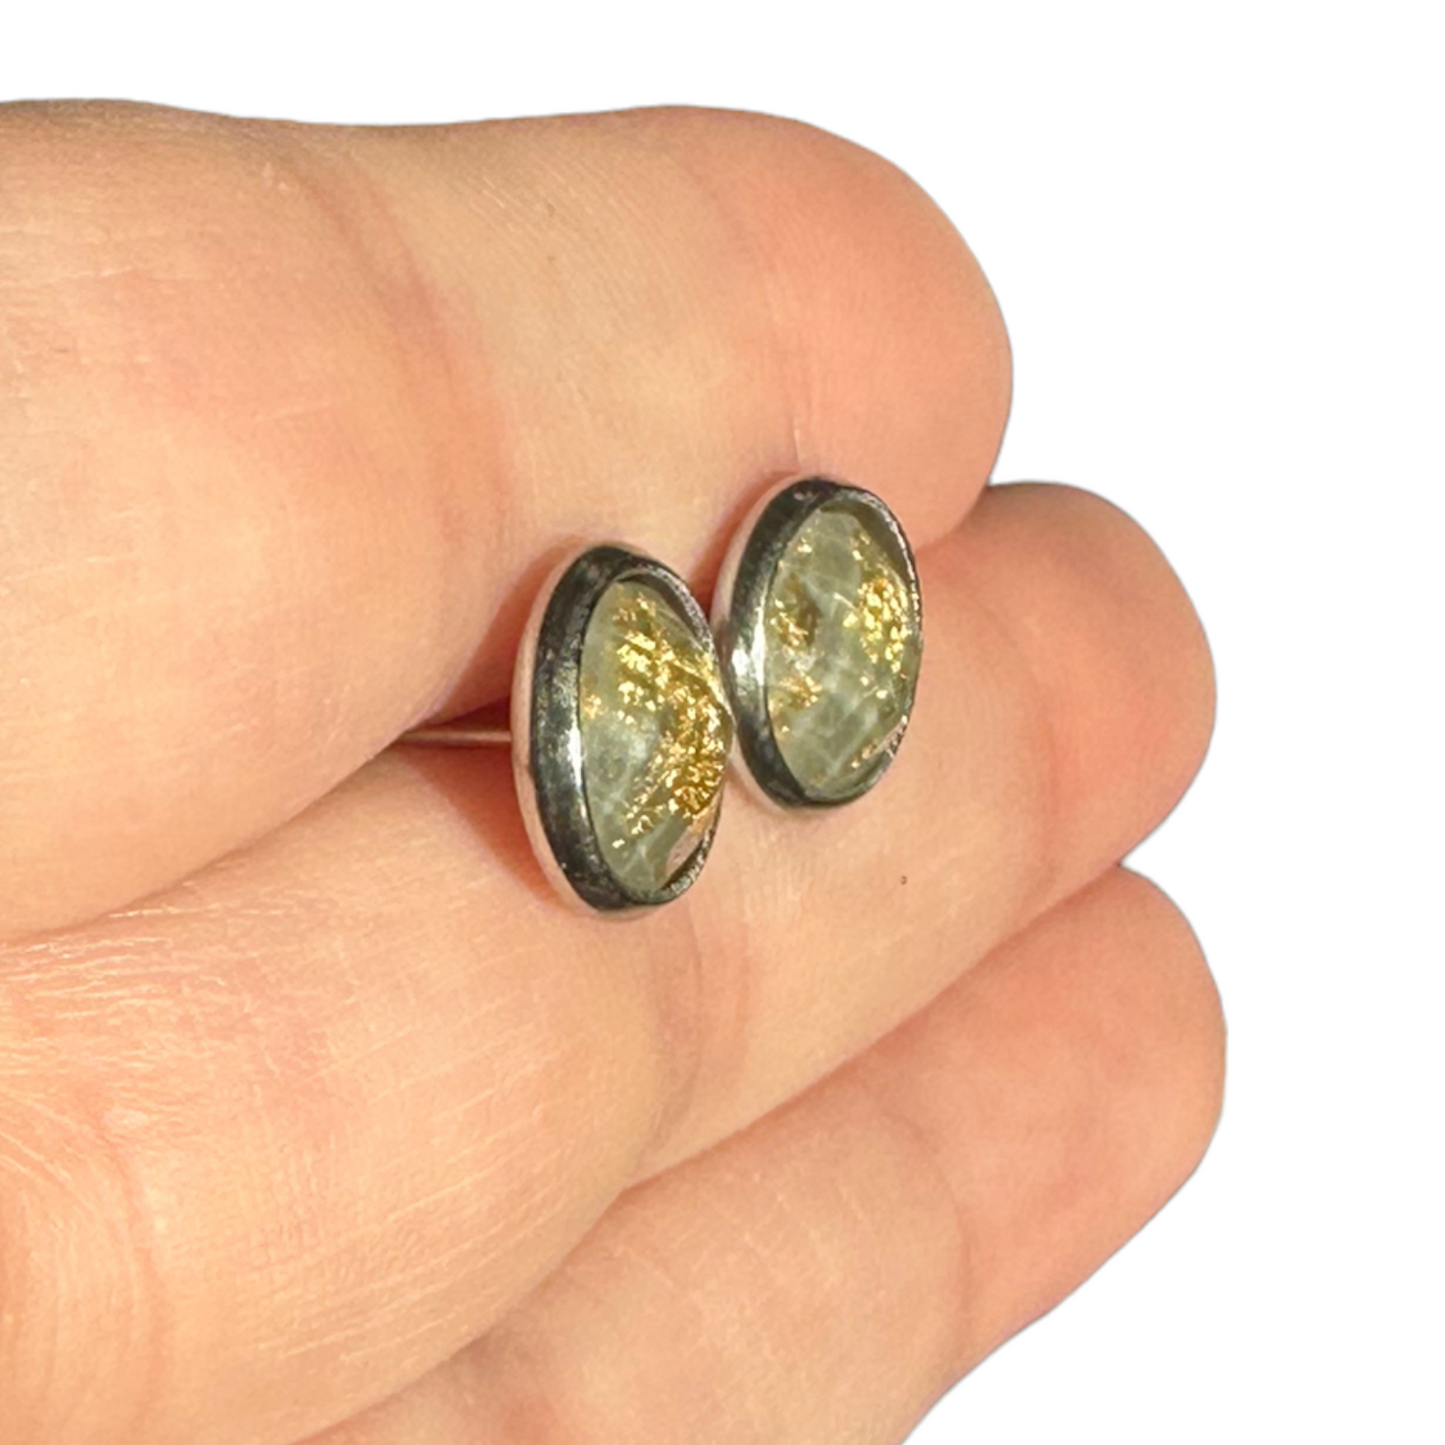 8MM Hypoallergenic Gray and Gold Leaf Faceted Epoxy Resin Earrings